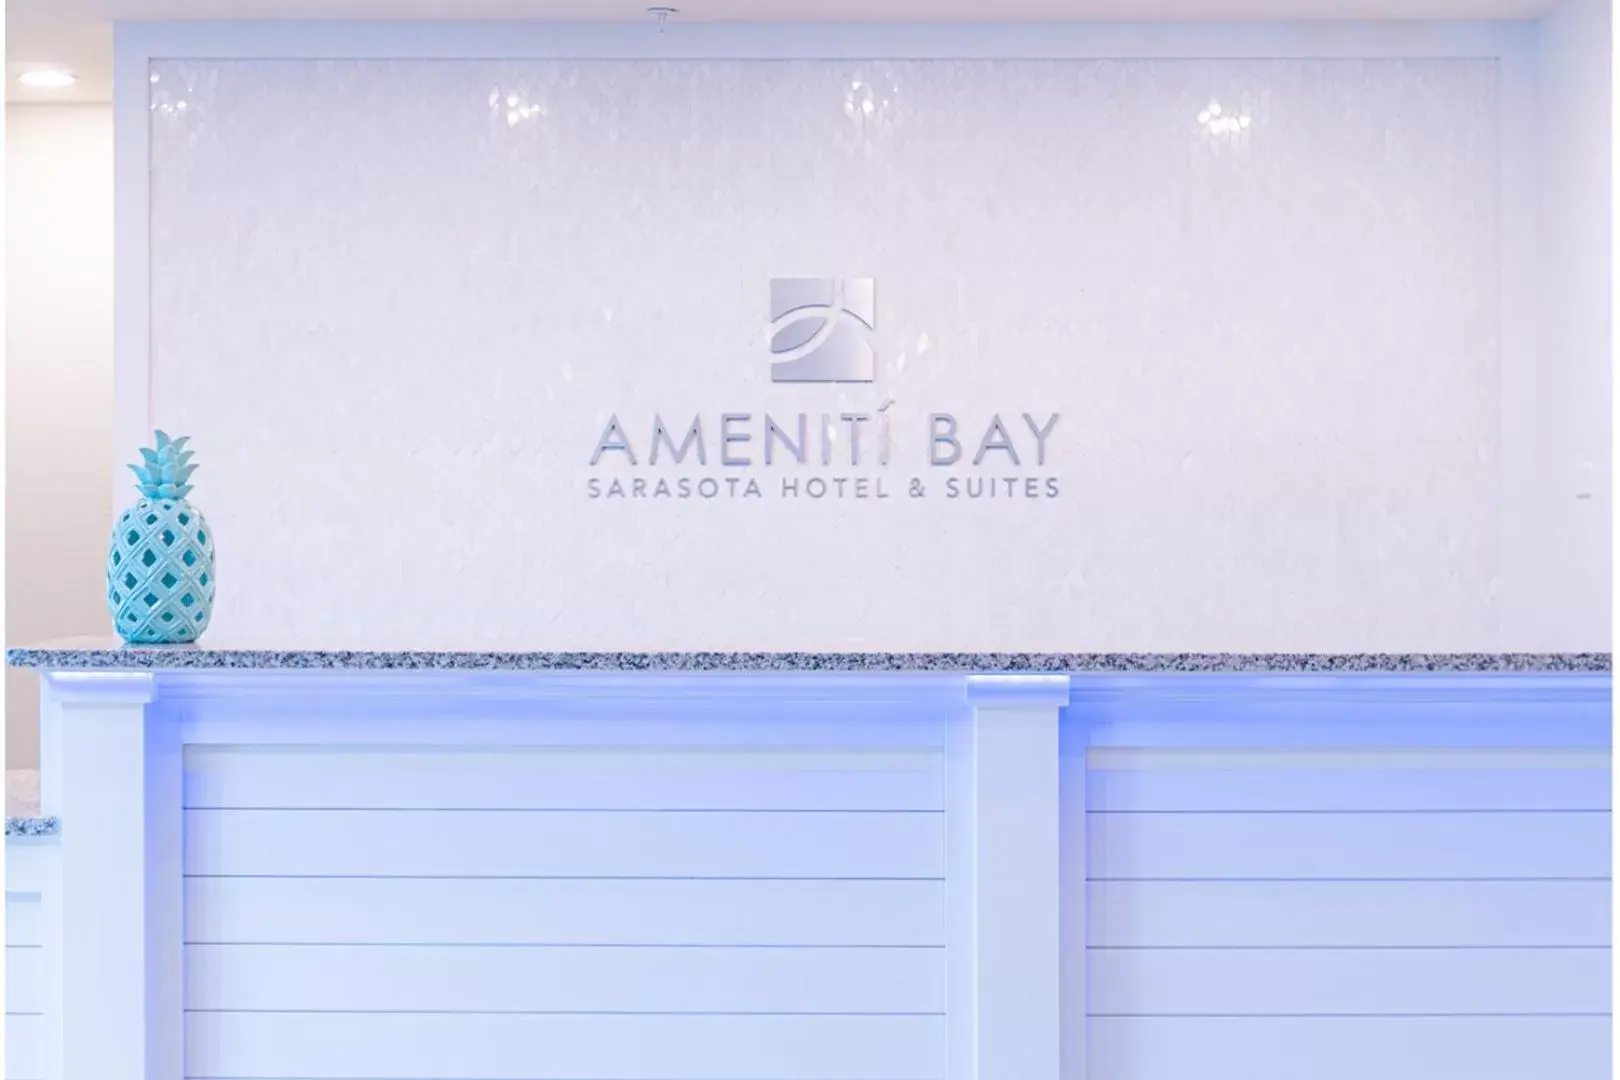 Property logo or sign, Property Logo/Sign in Ameniti Bay - Best Western Signature Collection